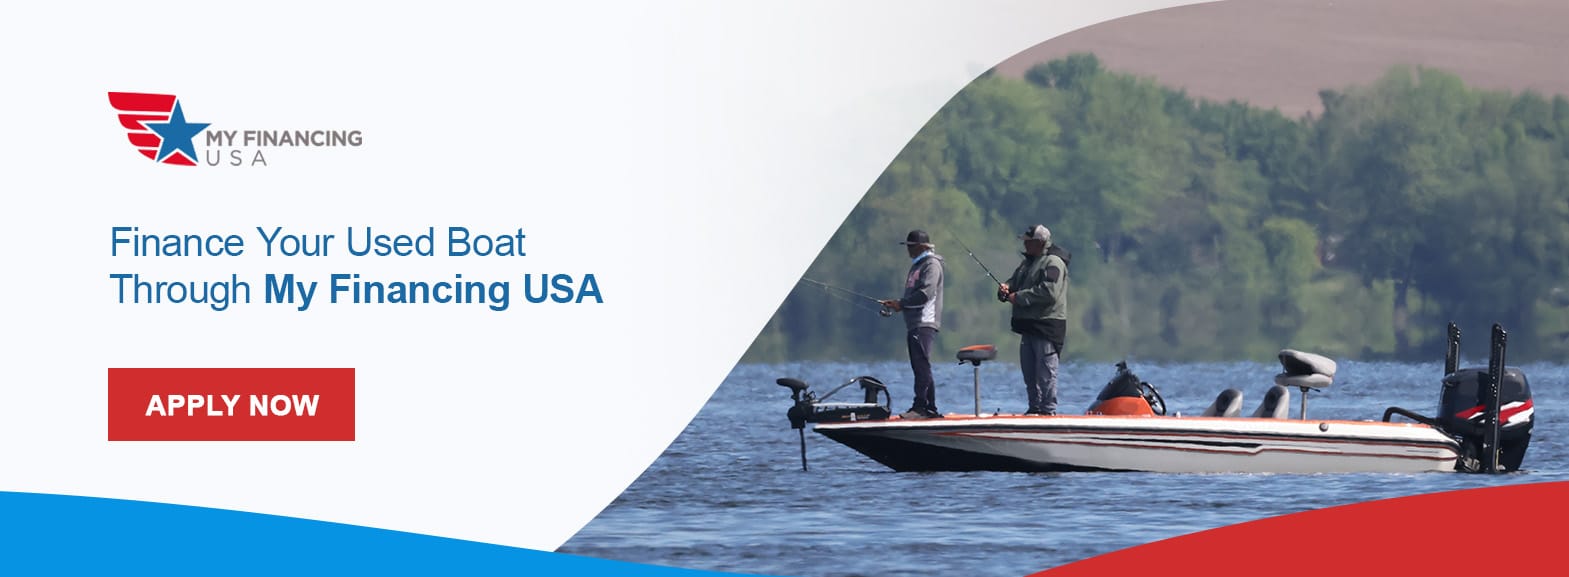 Finance Your Used Boat Through My Financing USA. Apply now!